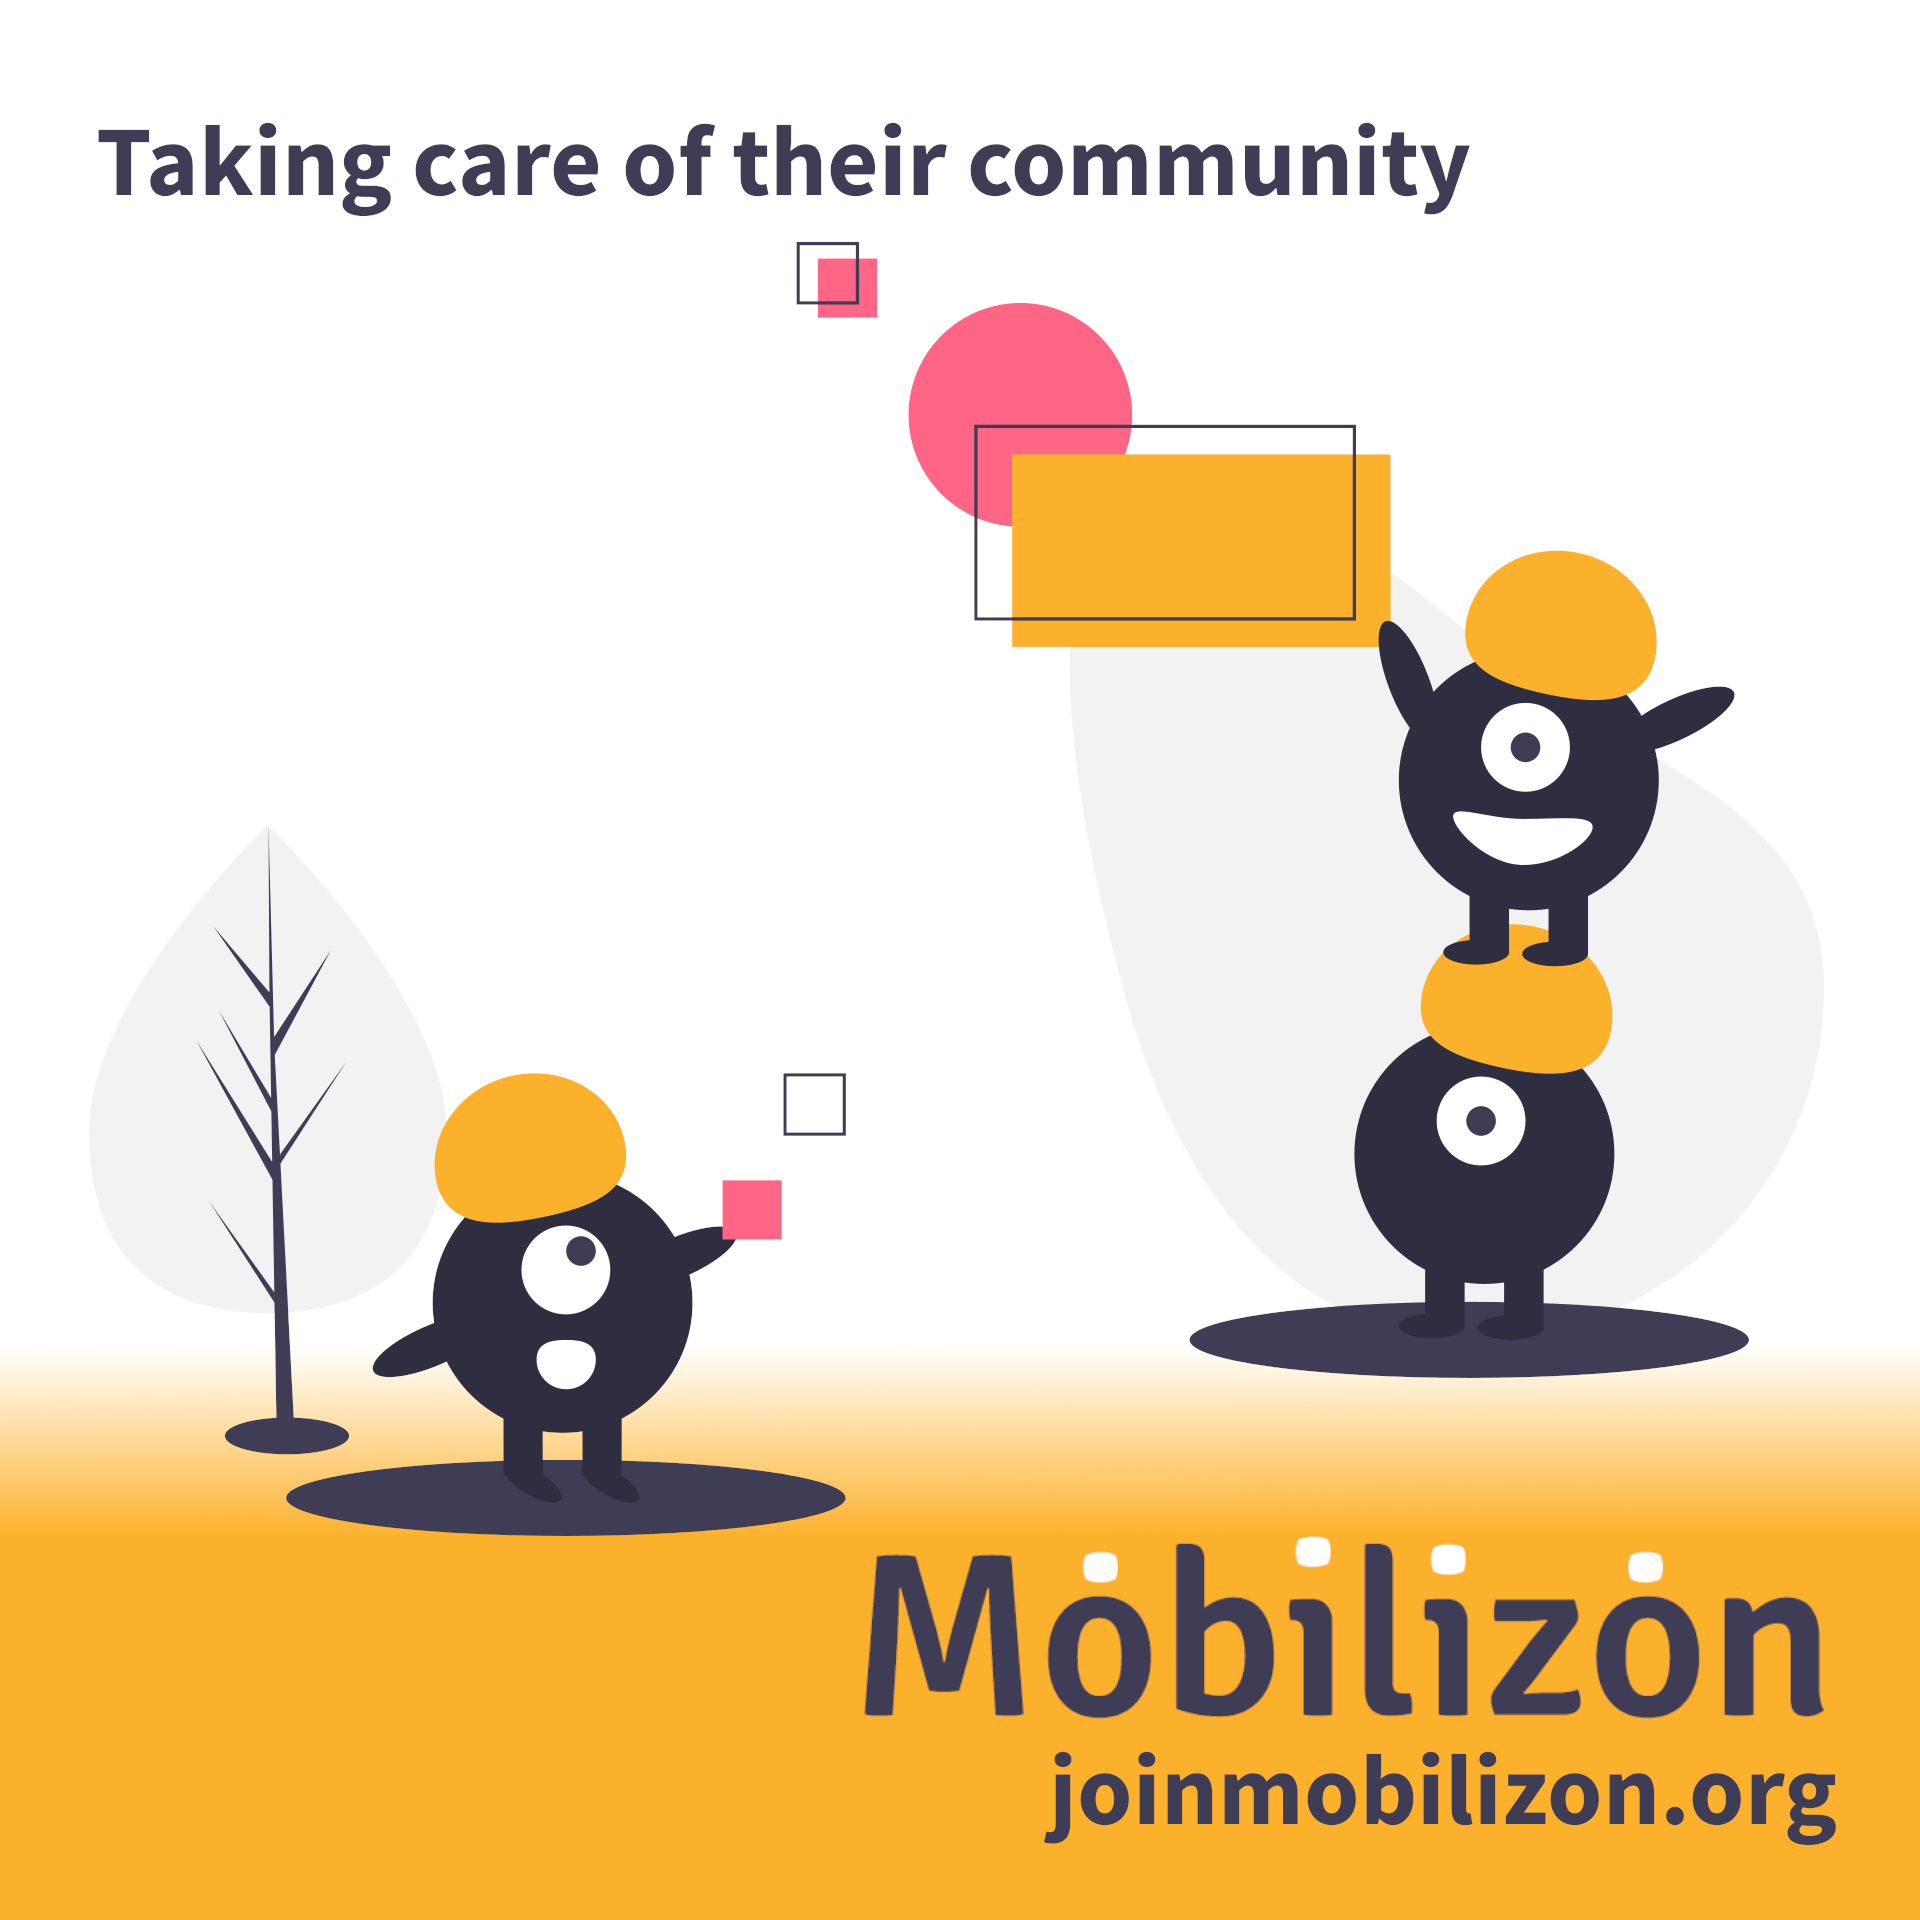 Mobilizon poster from the joinmobilizon org blog